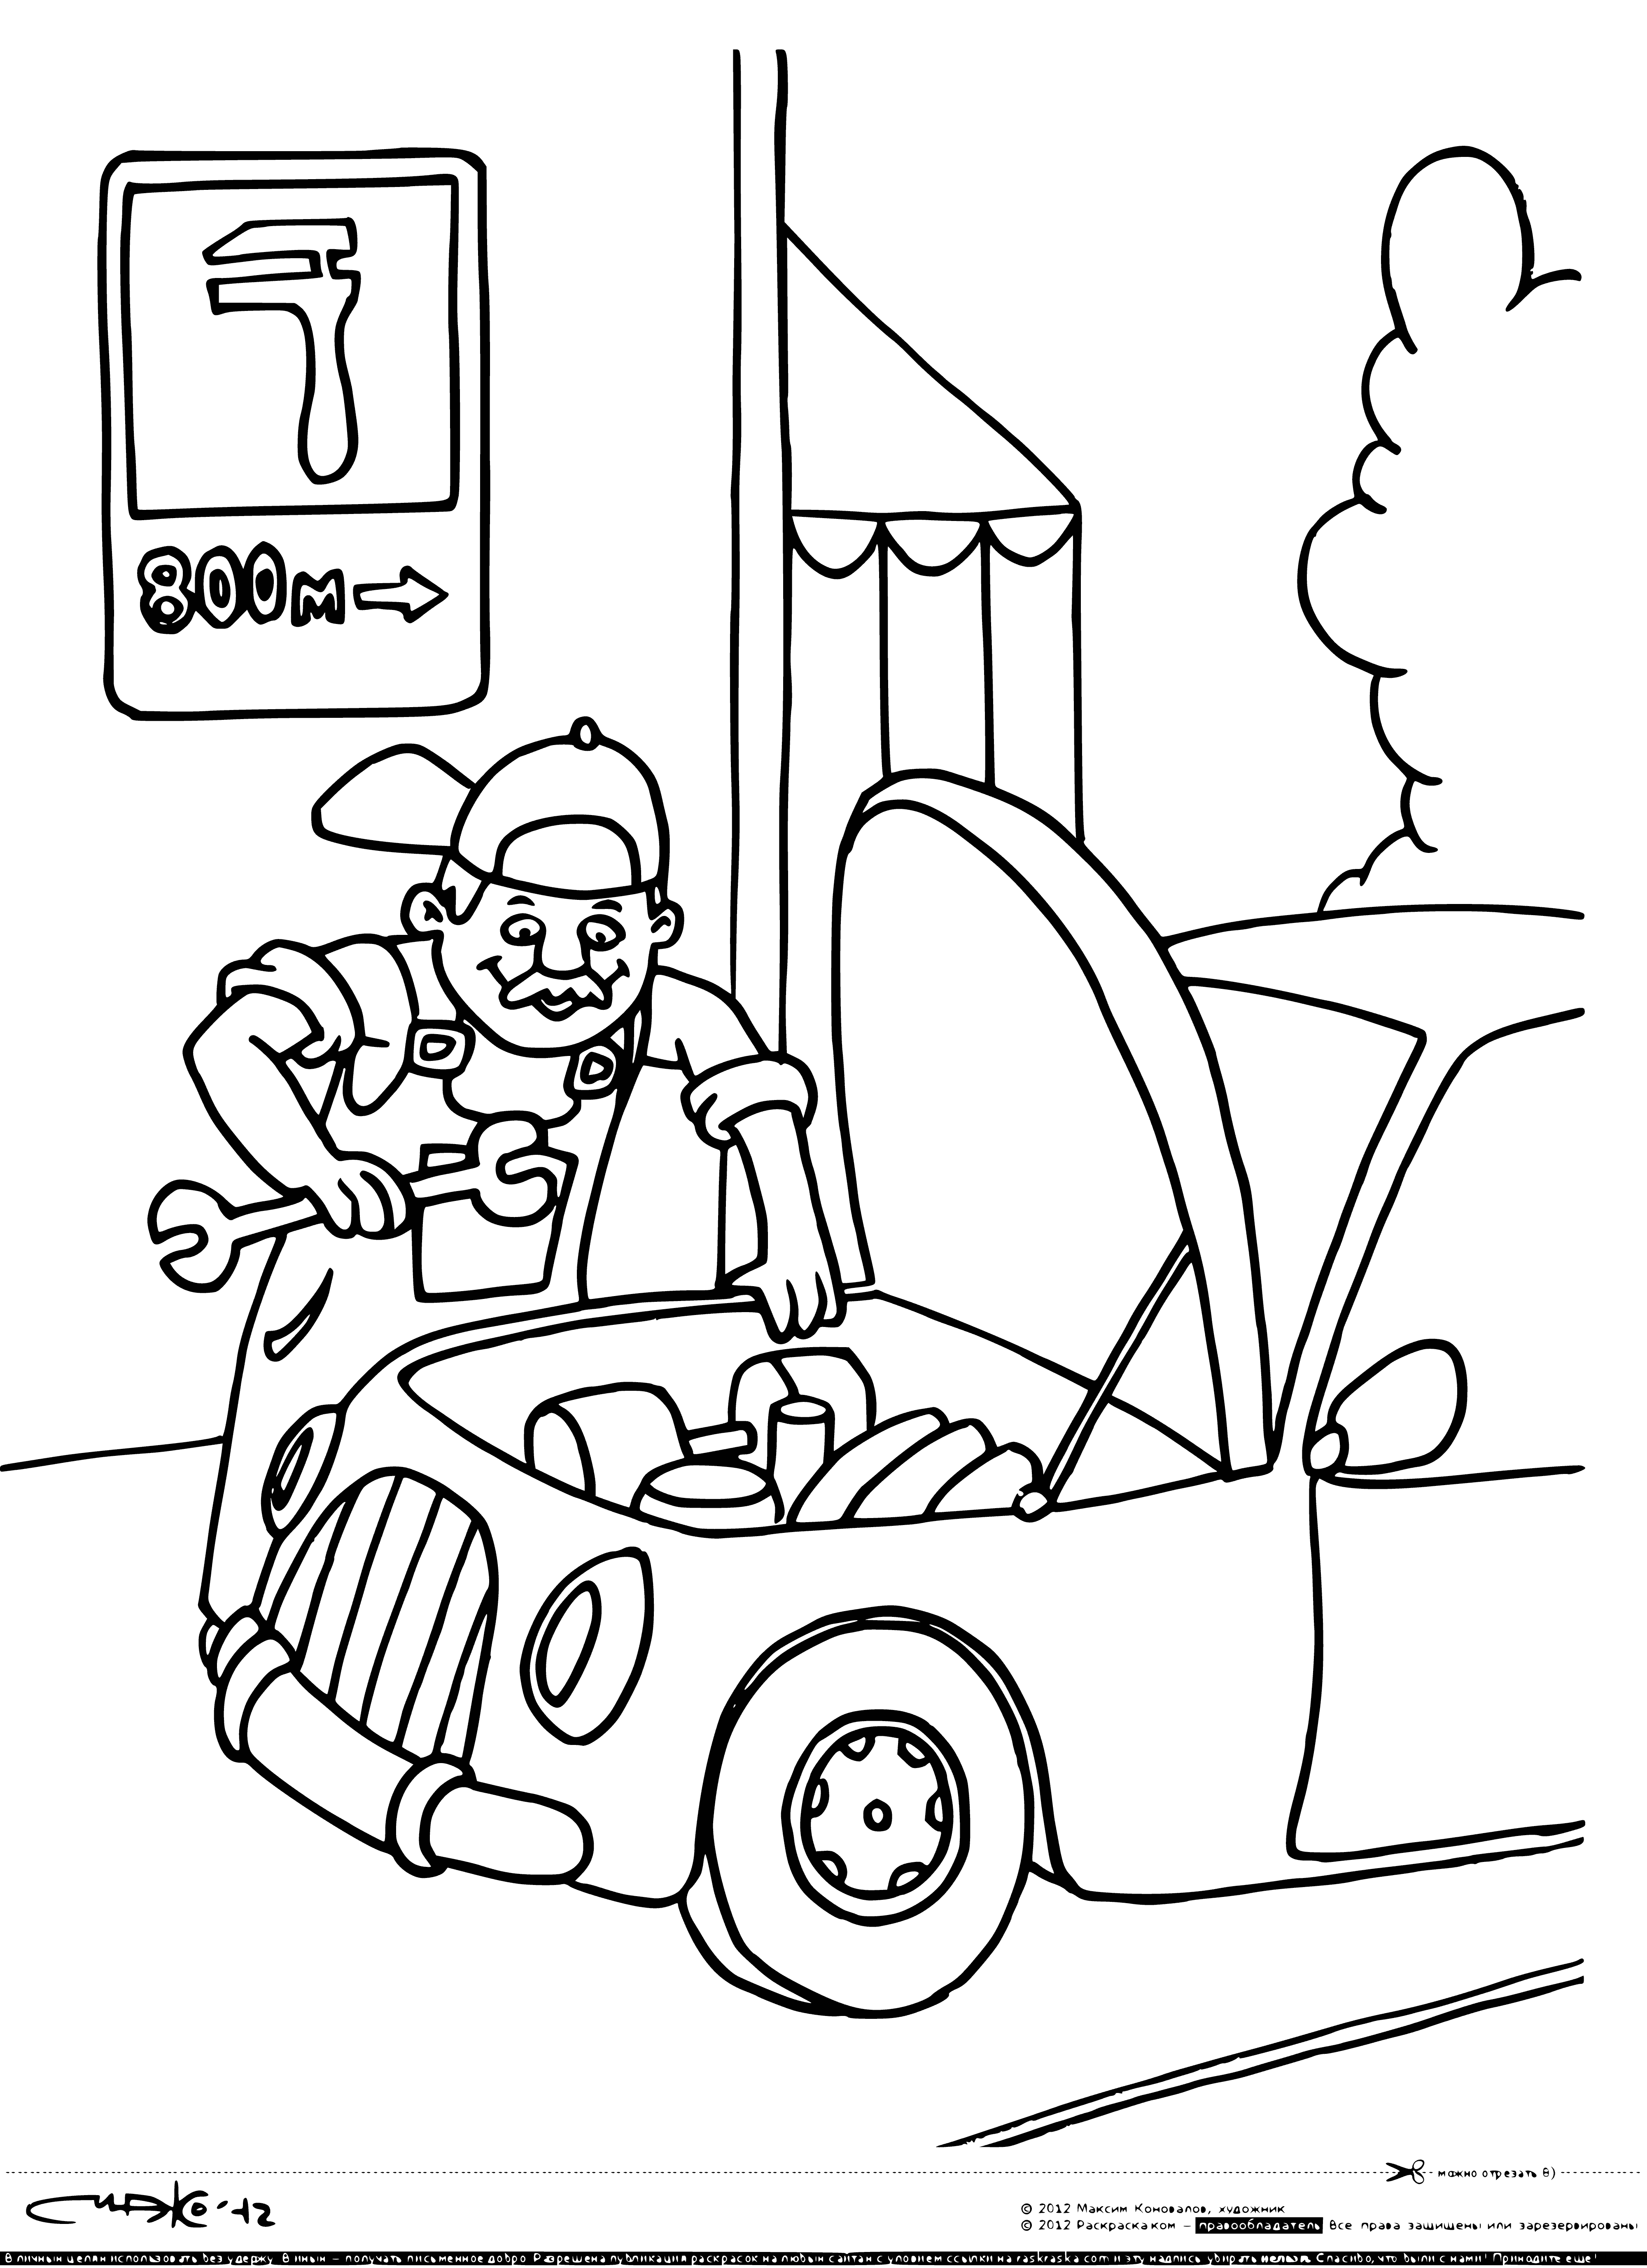 coloring page: Red stop sign, yellow yield sign, white speed limit w/"55", blue car maintenance sign; indicate different things when driving.